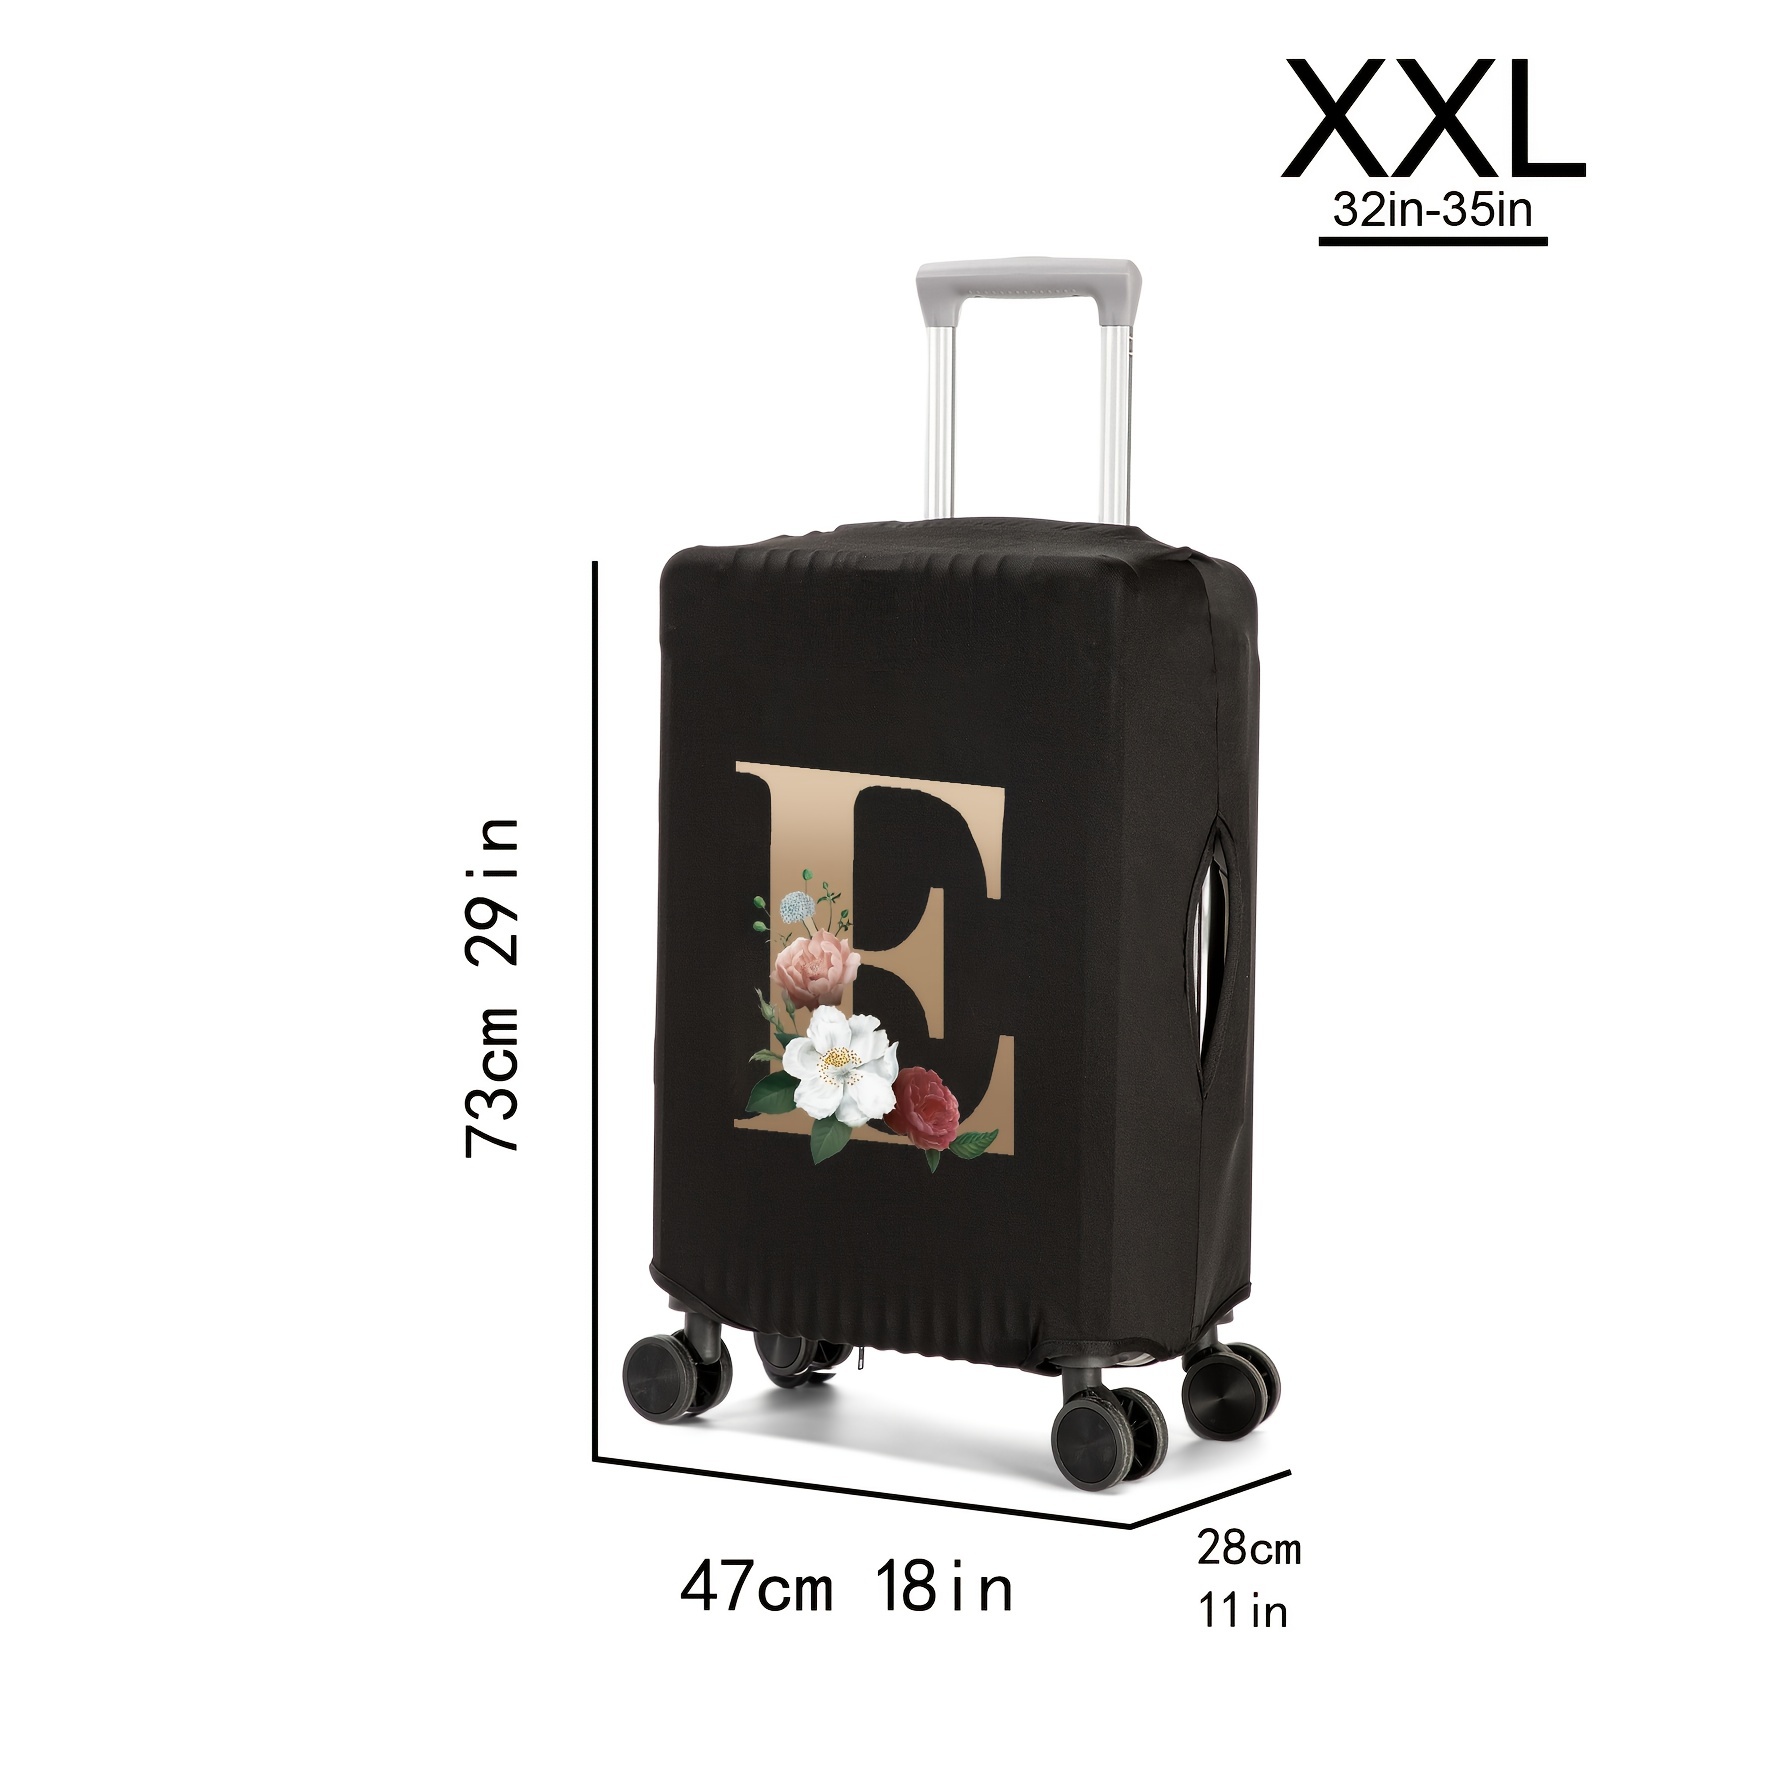 Suitcase Protective Covers Elastic Luggage Cover